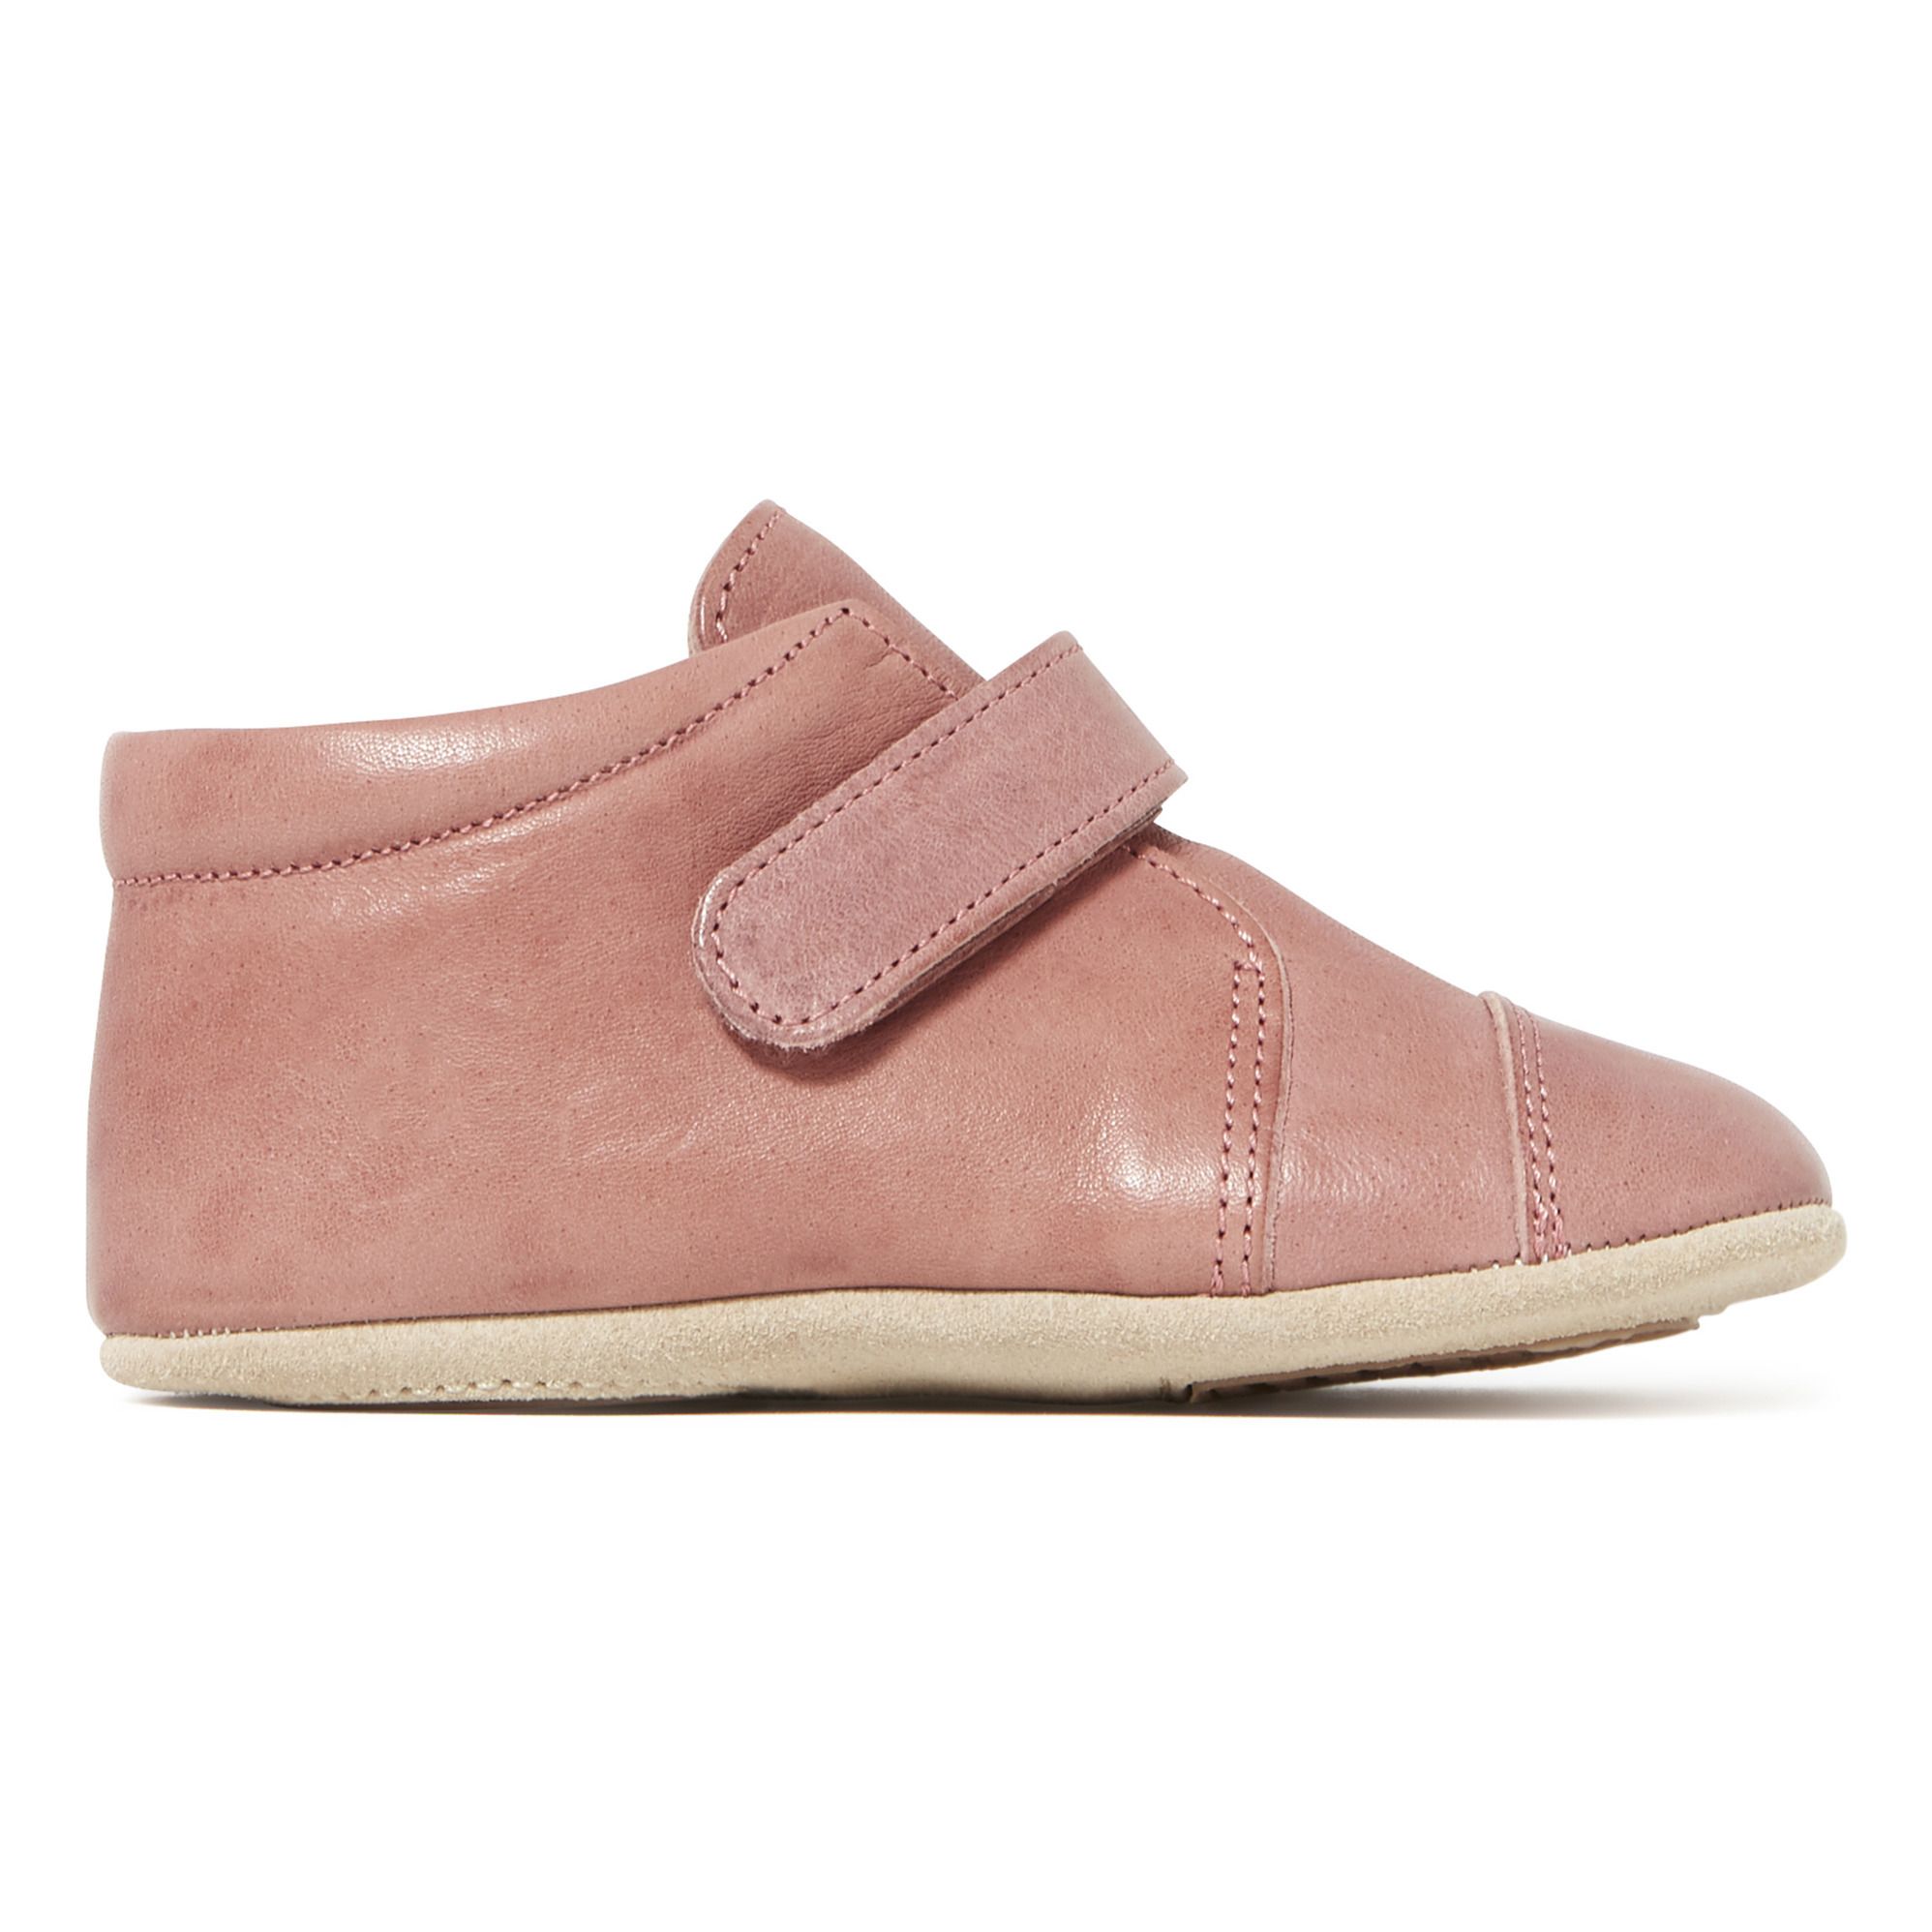 Petit Nord - Chaussons Scratchs - Fille - Vieux Rose